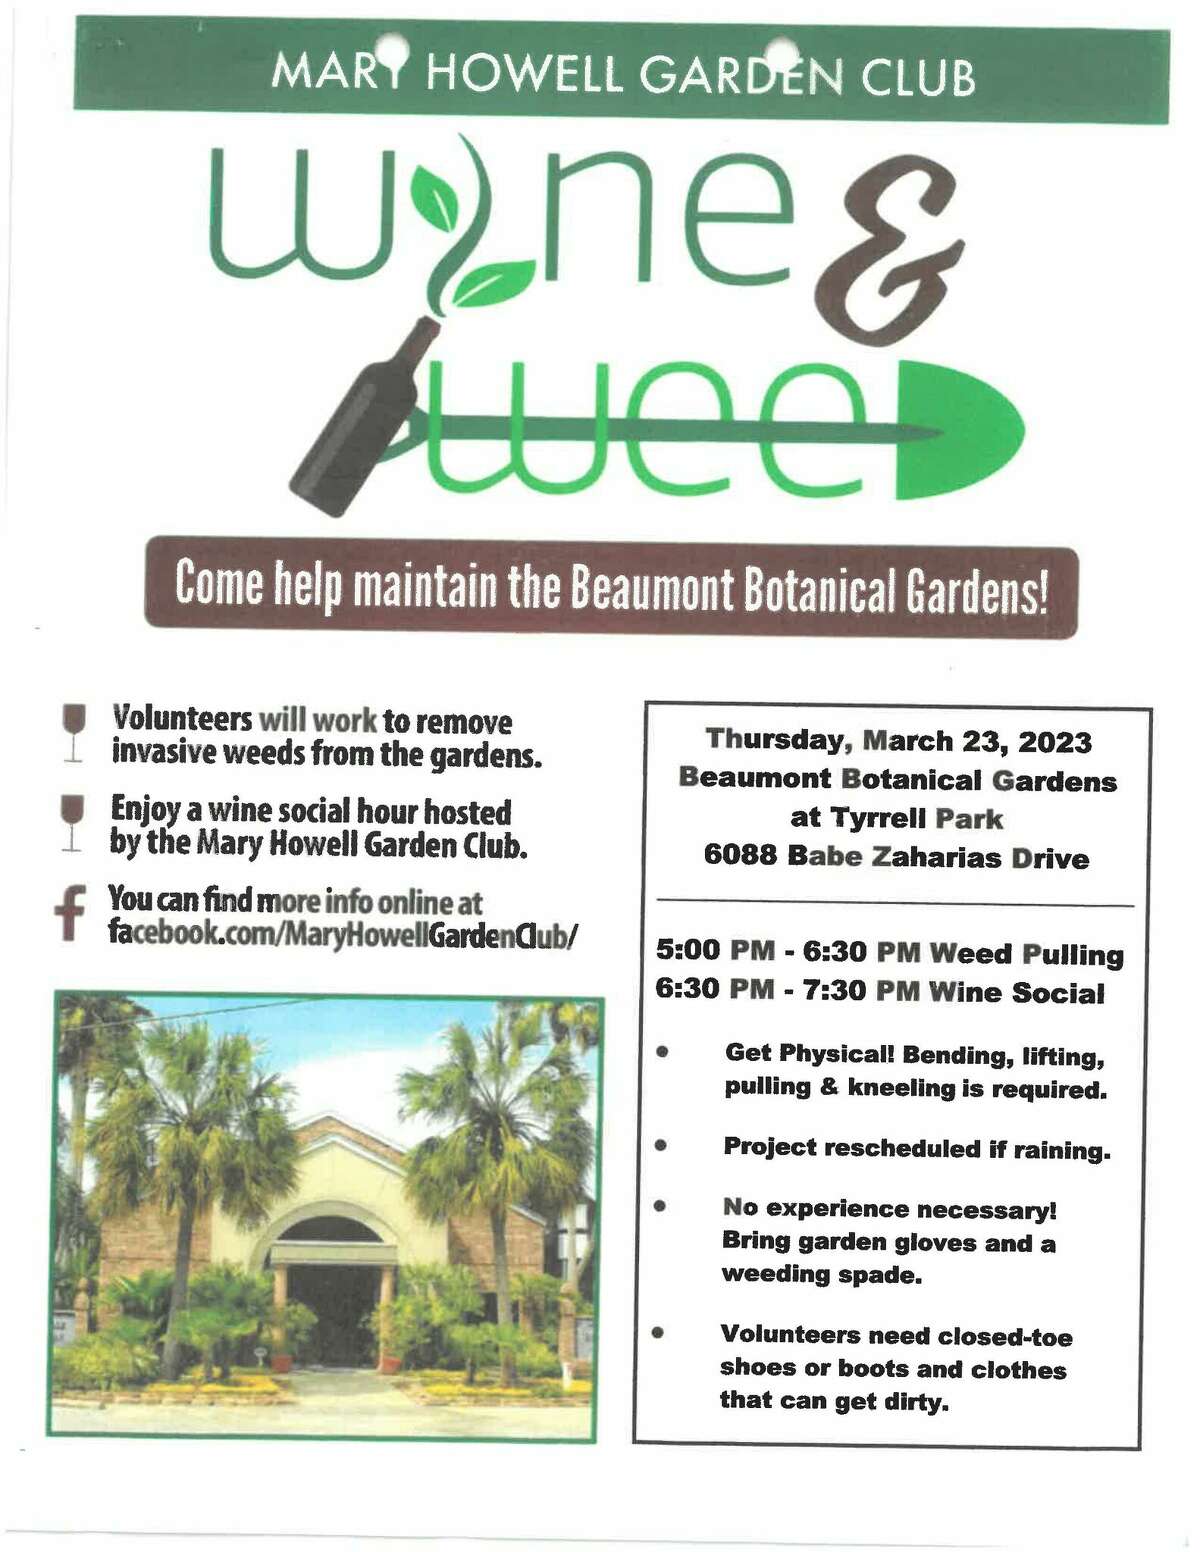 The Mary Howell Garden Club will have its third annual "Wine and Weed" fundraiser on Thursday, March 23, 2023, at Beaumont Botanical Gardens.